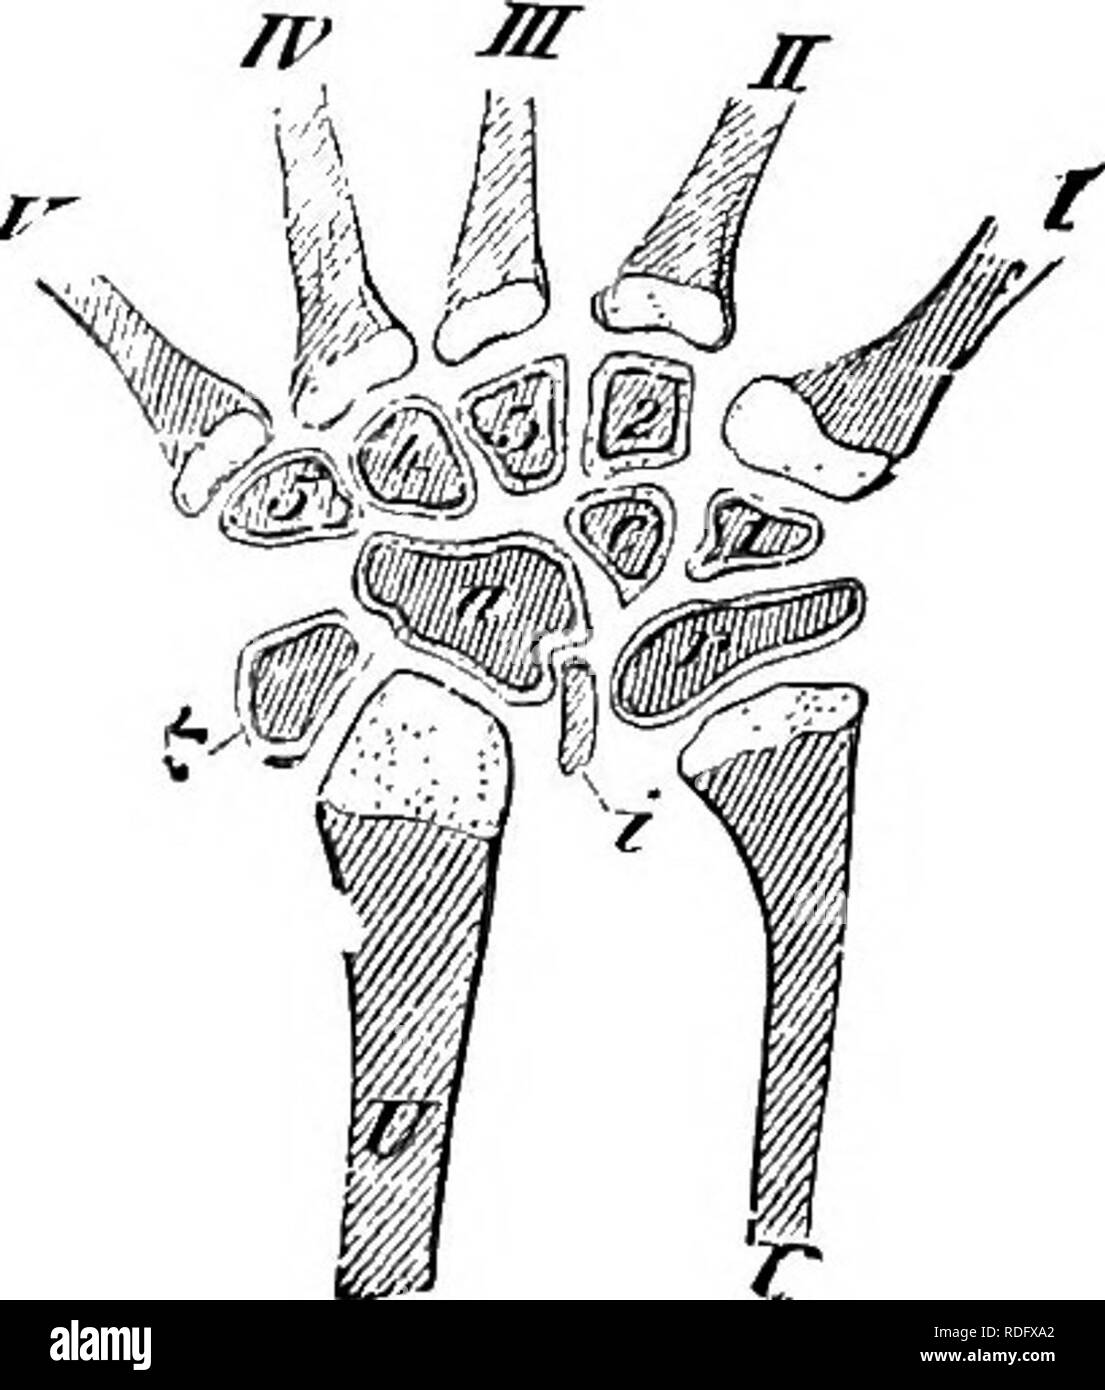 . Elements of the comparative anatomy of vertebrates. Anatomy, Comparative. Fig. 108.—Right Carpus of Emys europcea. (From above.) i?, Radius ; U, ulna ; r.c, fused radiale and centrale (or centrale 1 and 2, Baur) ; i, intermedium; u, ulnare; 1-5, the carpalia, of which 4 and 5 have become fused together ; t (radiale, Baur) and *, elements on the radial and ulnar side res- pectively, indications of additional radial and ulnar (pisiform) rays ; I-V, the metacarpals.. Fig. 109.—Left Carphs of Lacerta agilis. (From above.) R, radius; U, ulna; ii, ul- nare ; i, intermedium ; r, radiale, formed by  Stock Photo